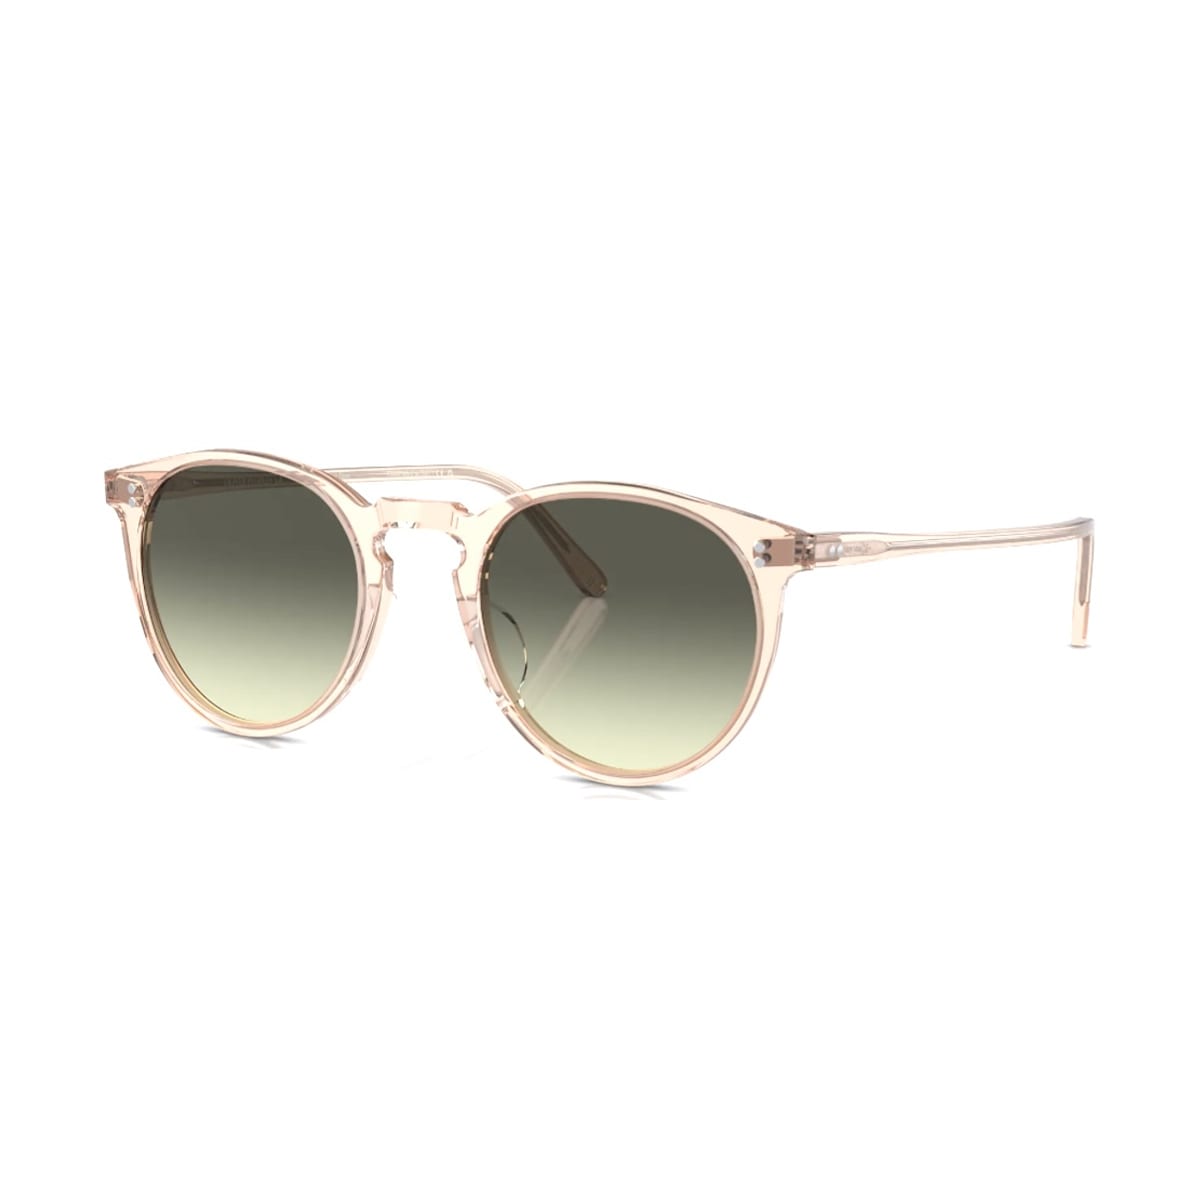 Shop Oliver Peoples Ov5183s 1758bh Sunglasses In Rosa